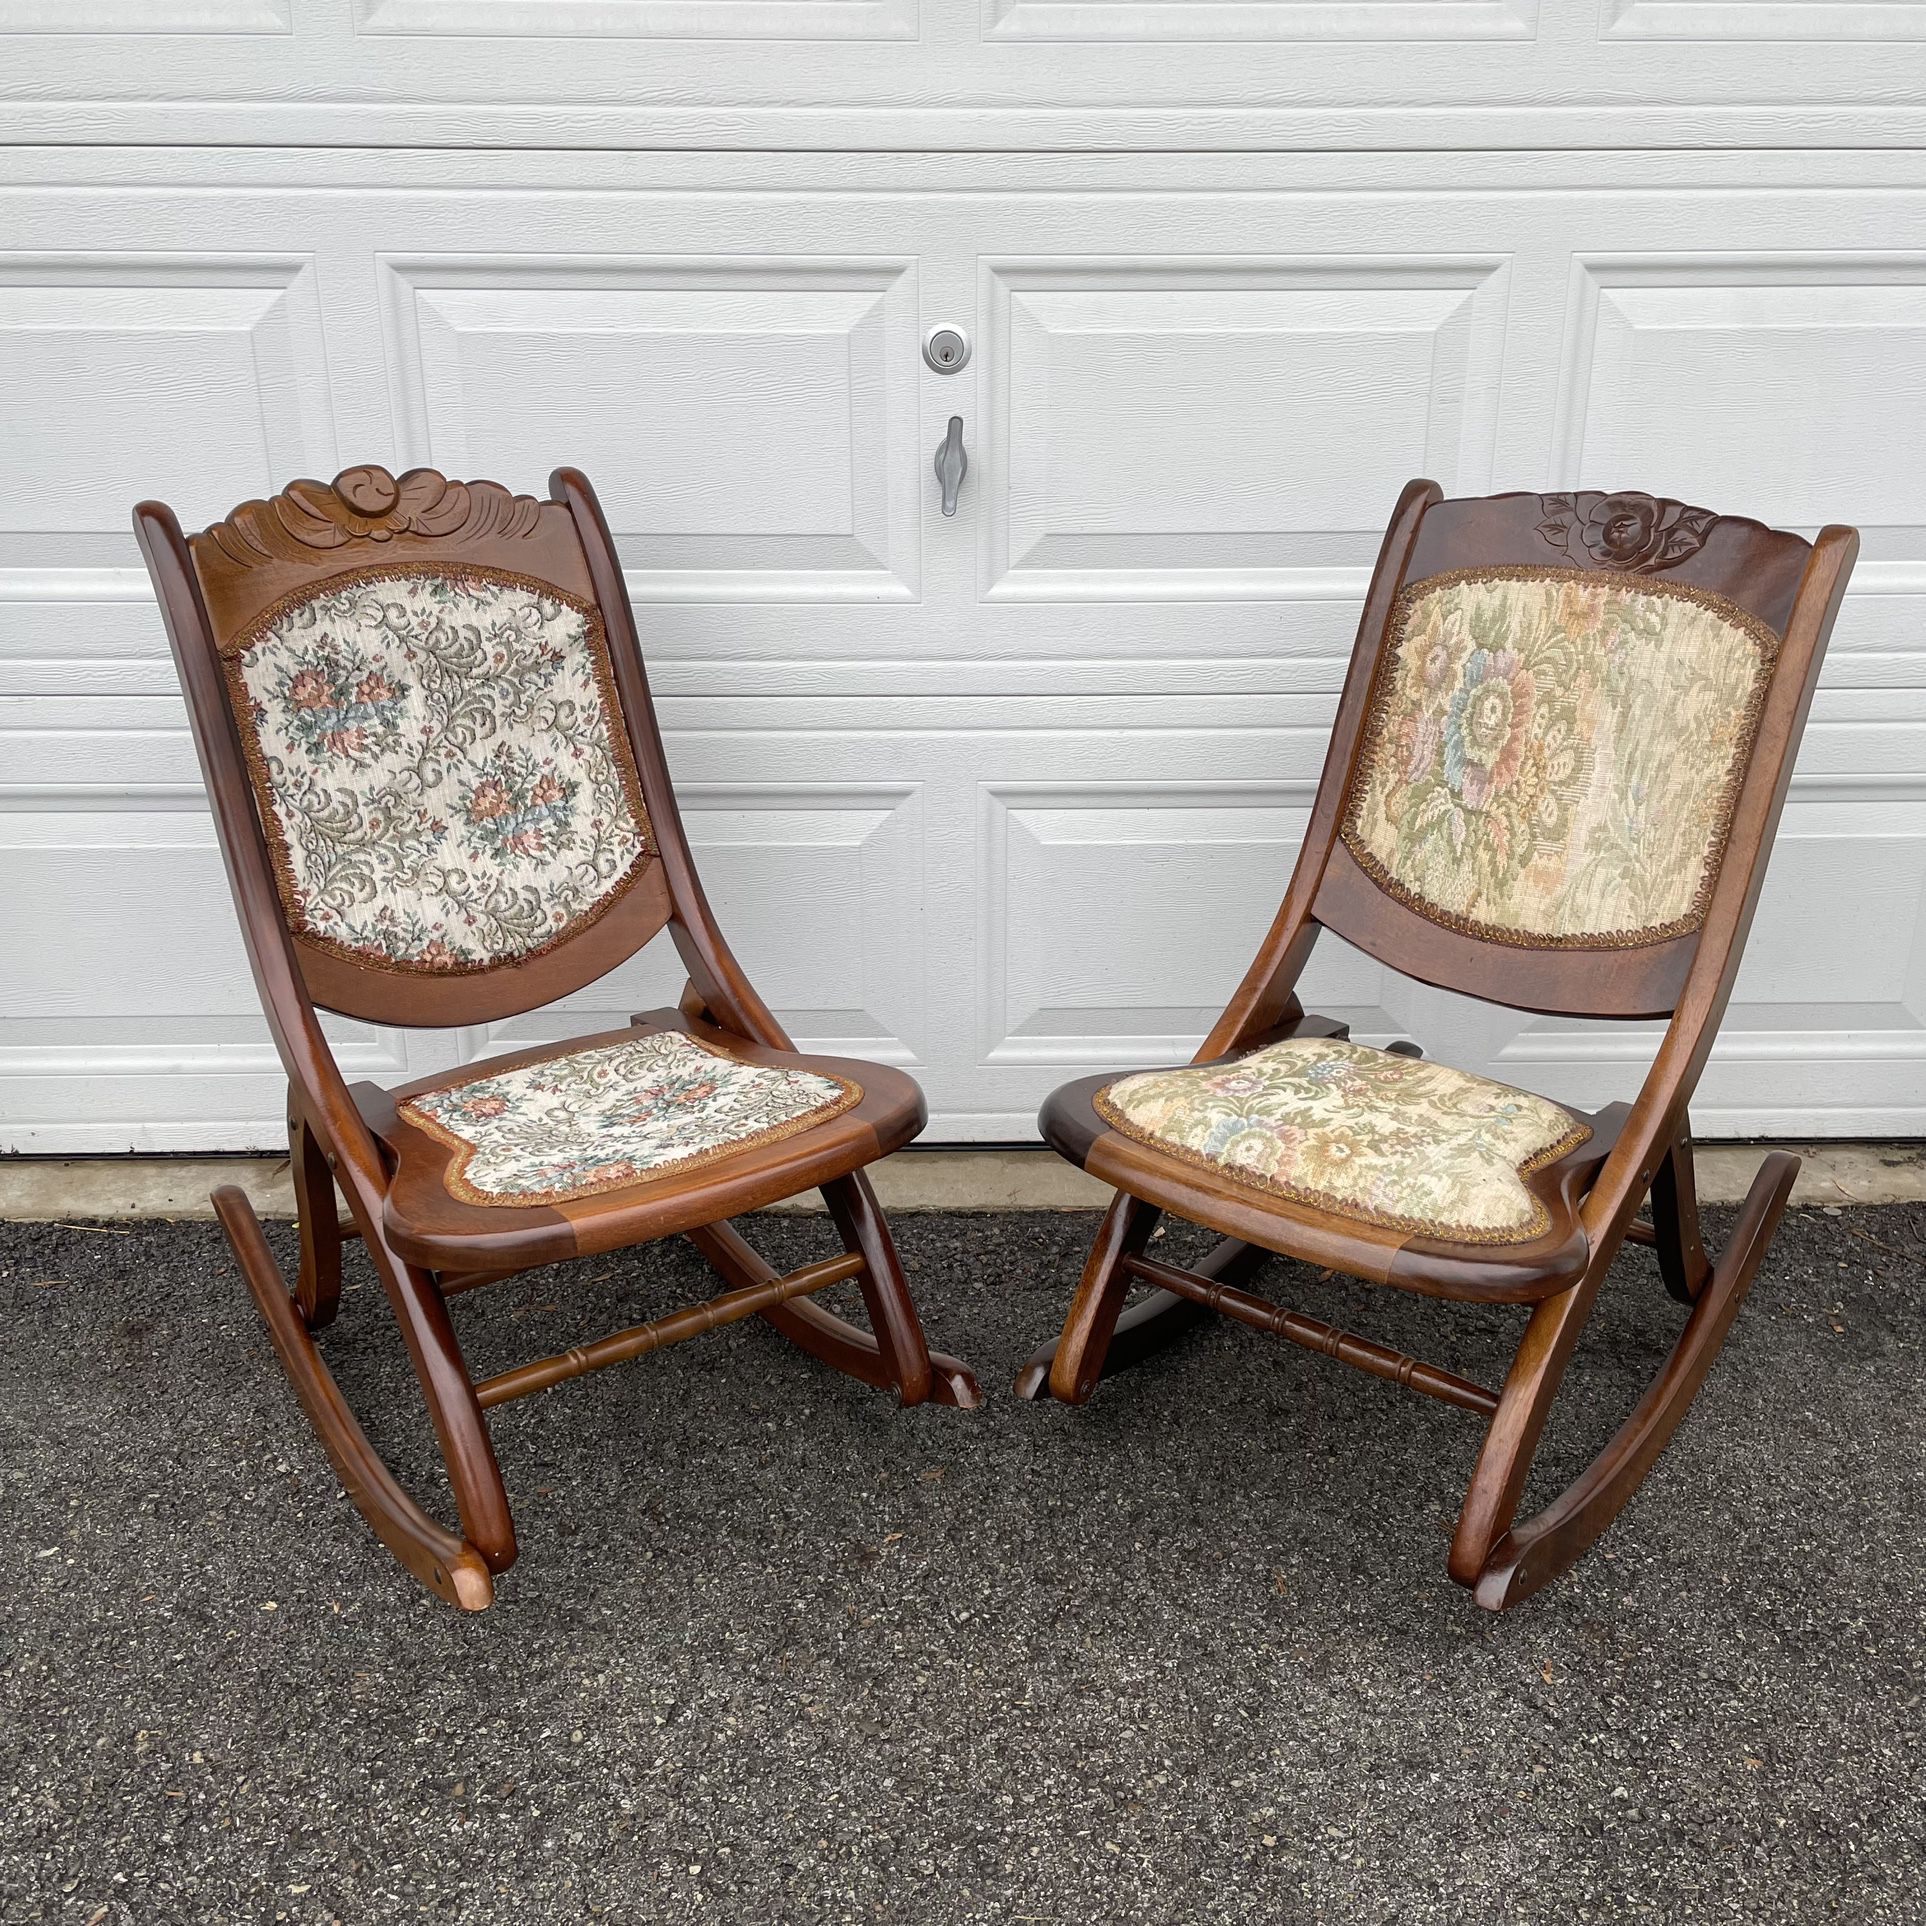 Antique Folding Rocking Chairs 